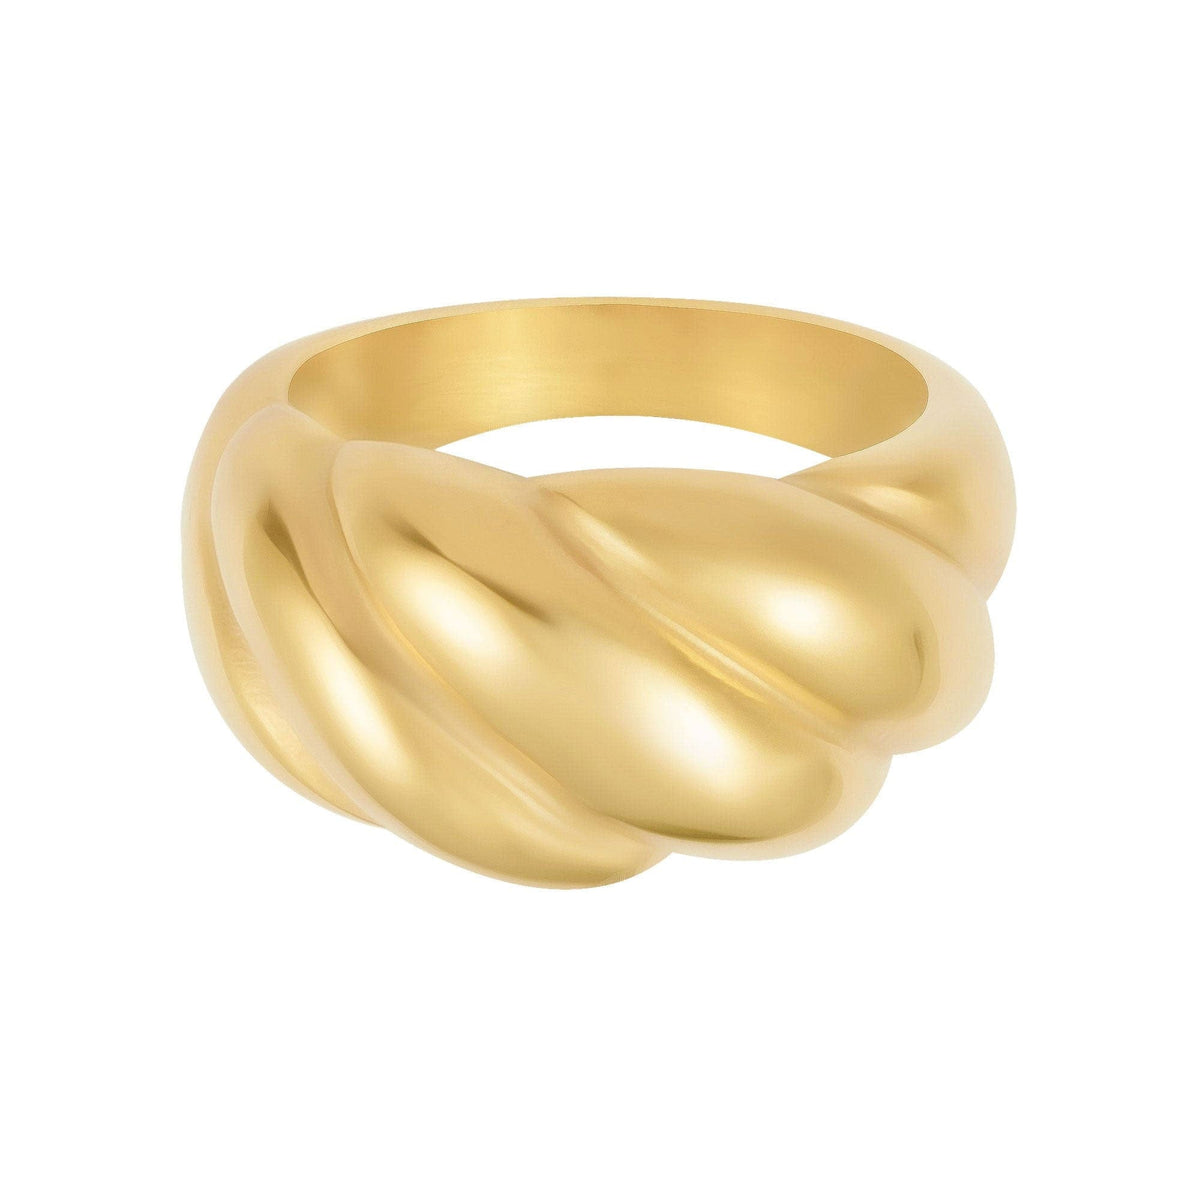 BohoMoon Stainless Steel Jovie Ring Gold / US 6 / UK L / EUR 51 (small)